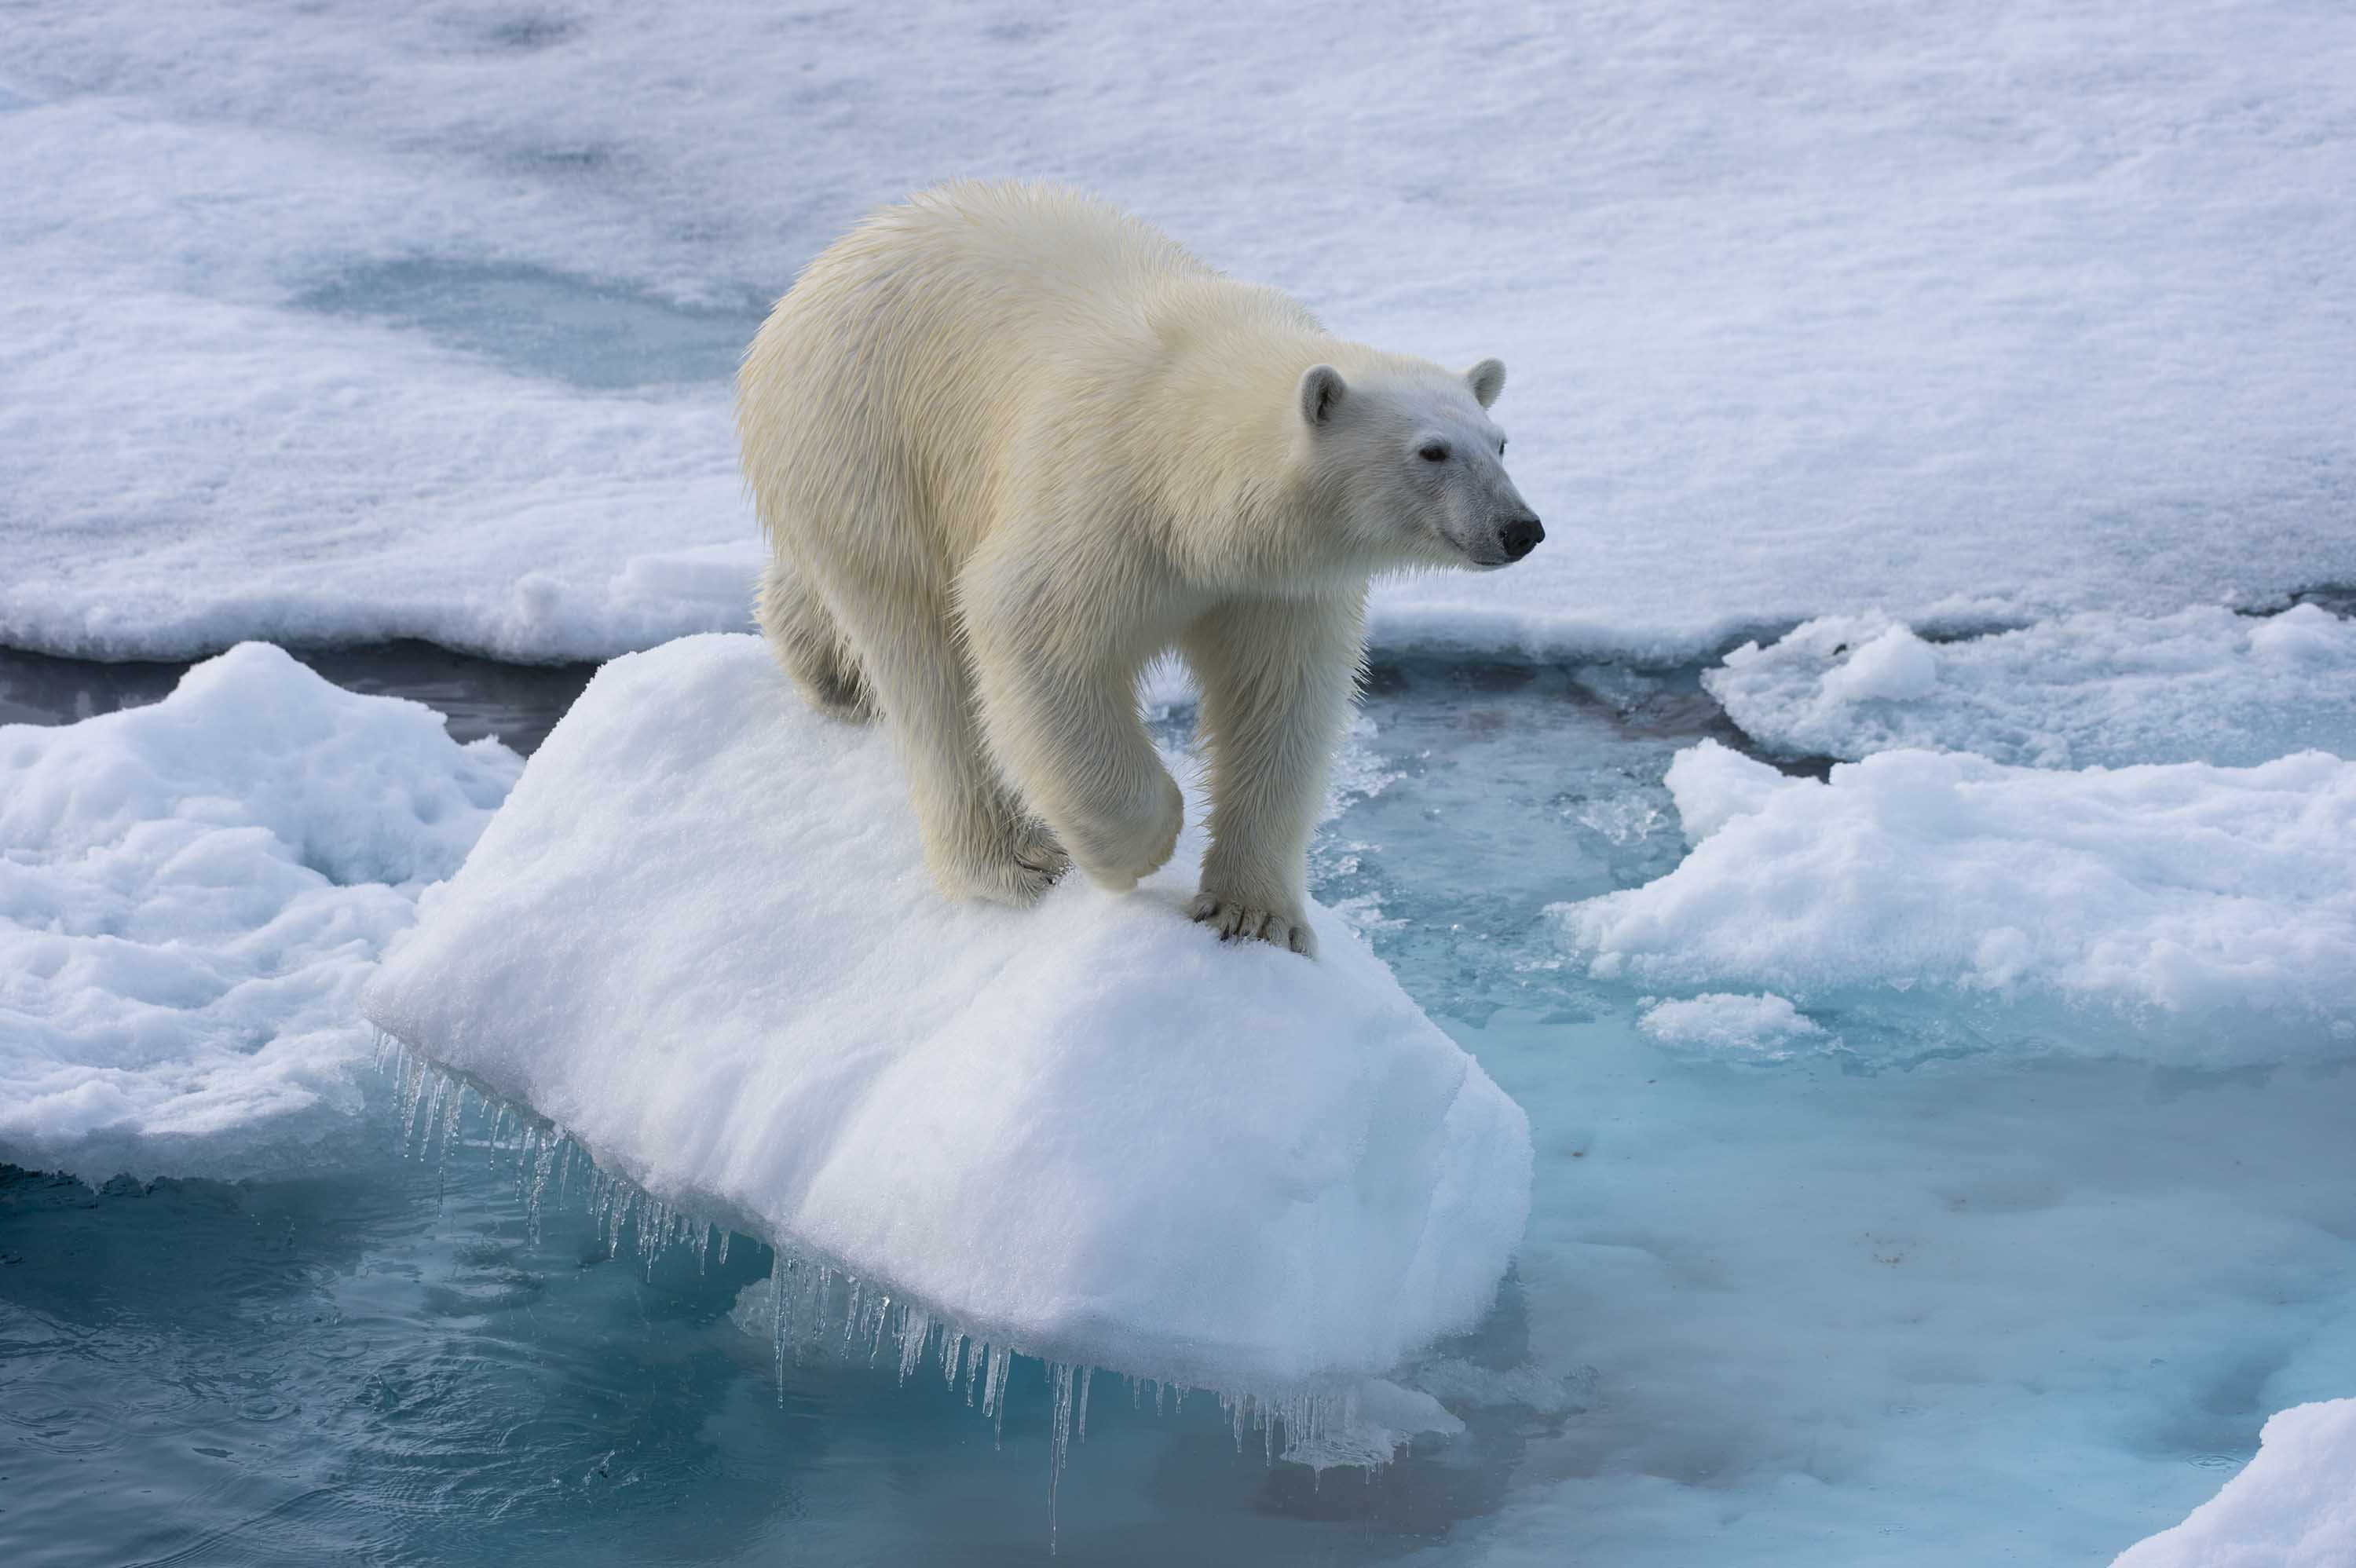 Polar bears could face extinction faster than thought, study says